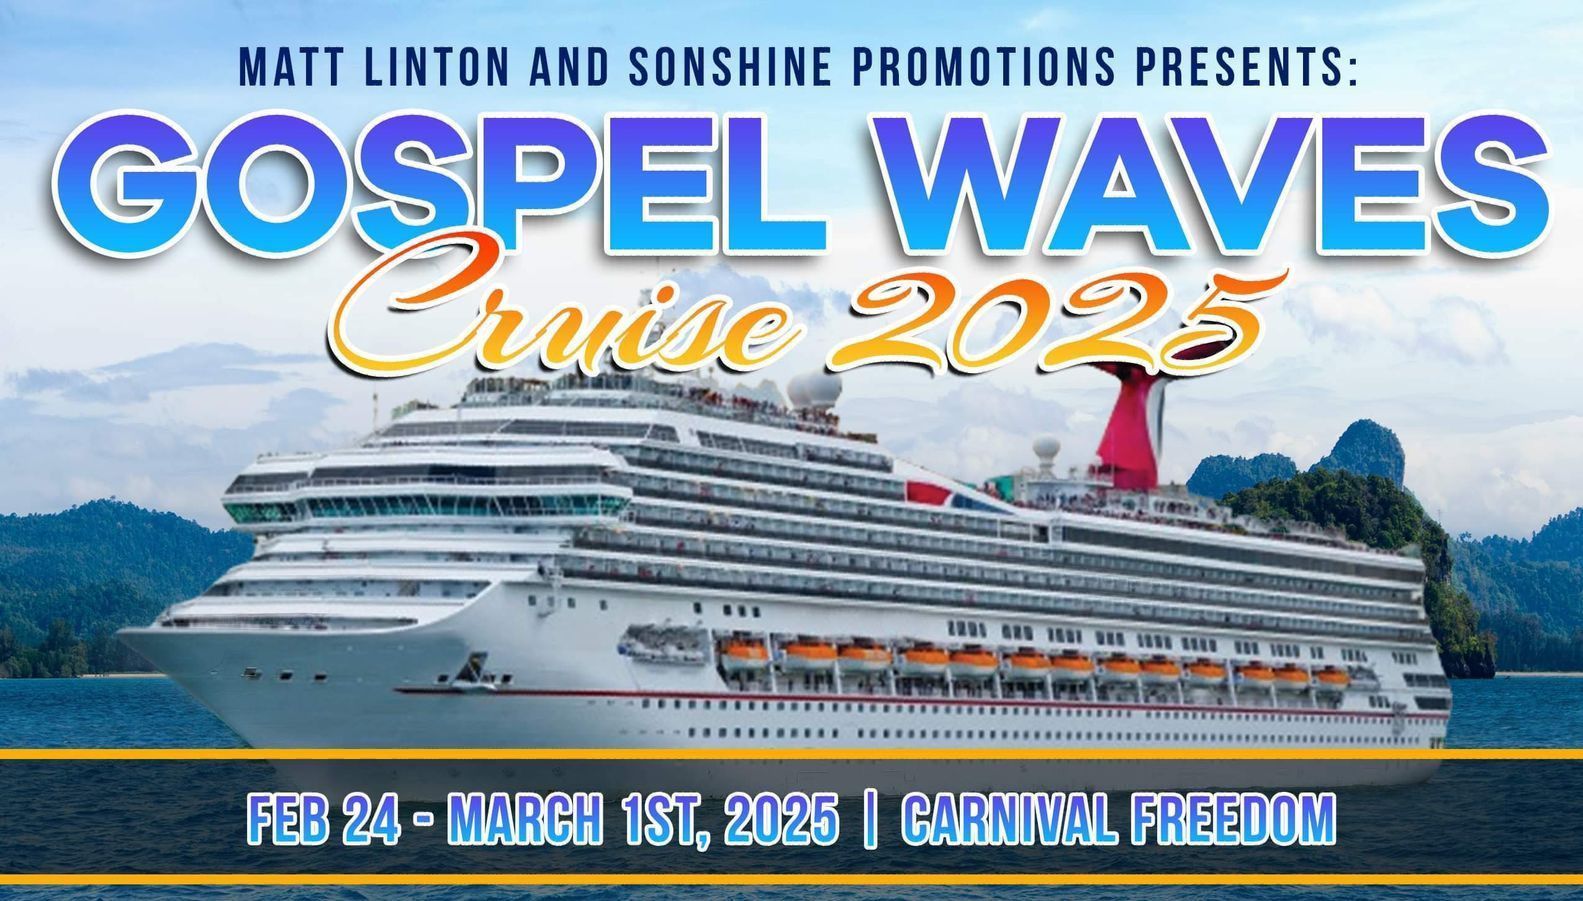 An advertisement for gospel waves cruise in 2025